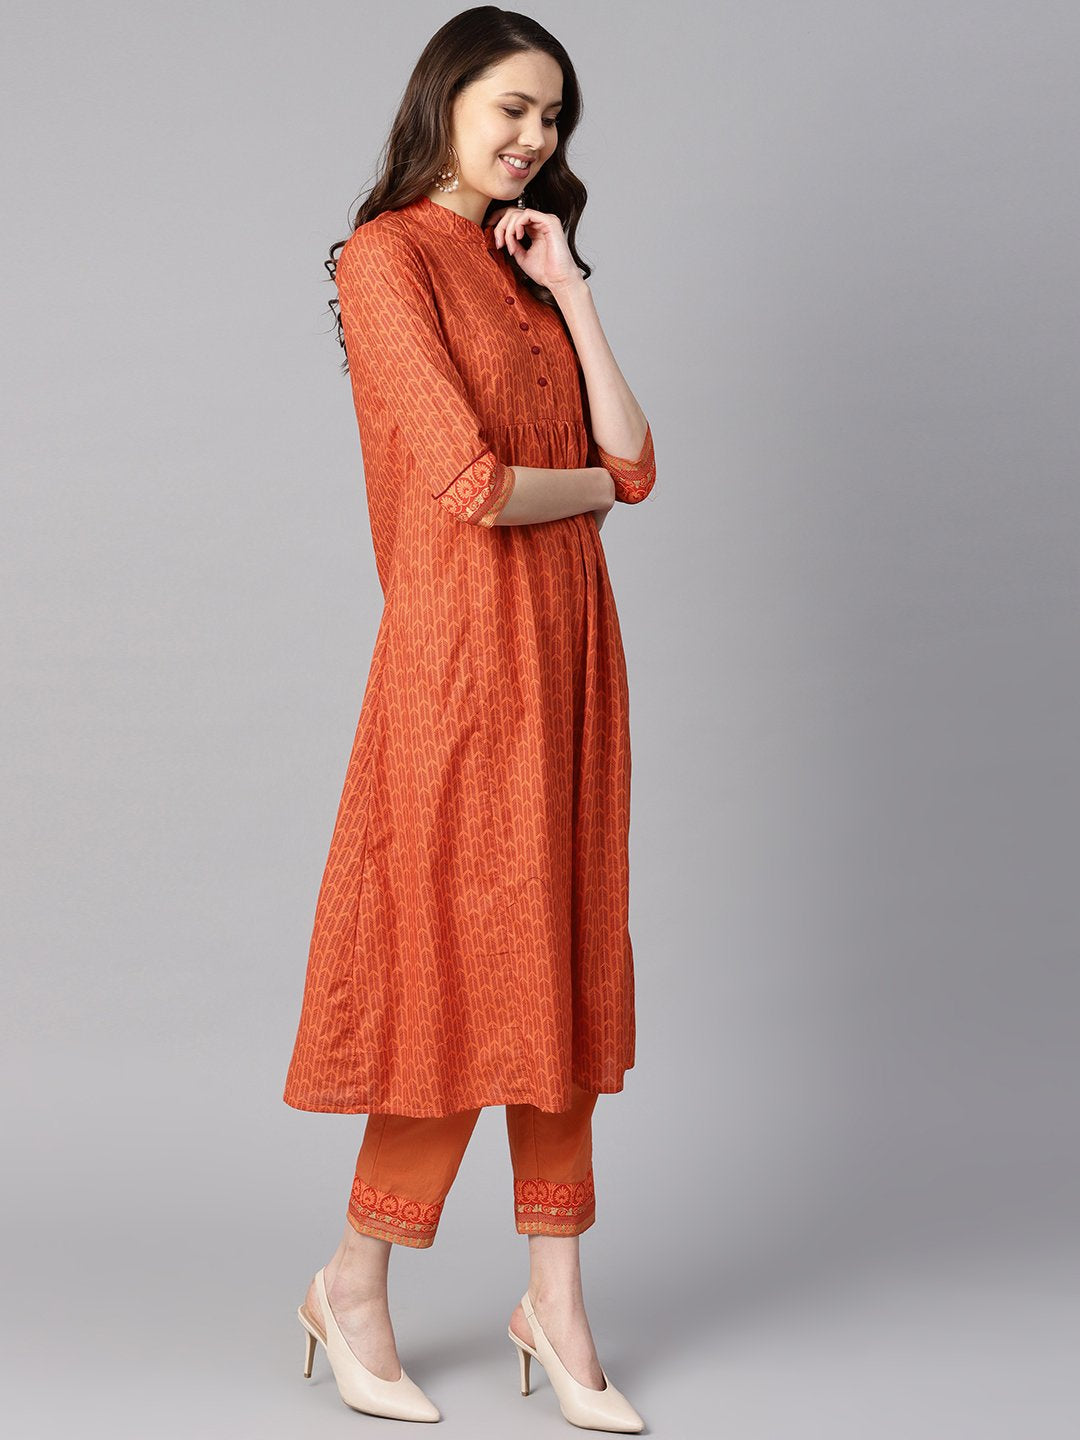 Women's A Line Pleated Kurta With Border Detailing On The Sleeves With Straight Solid Pants - Nayo Clothing